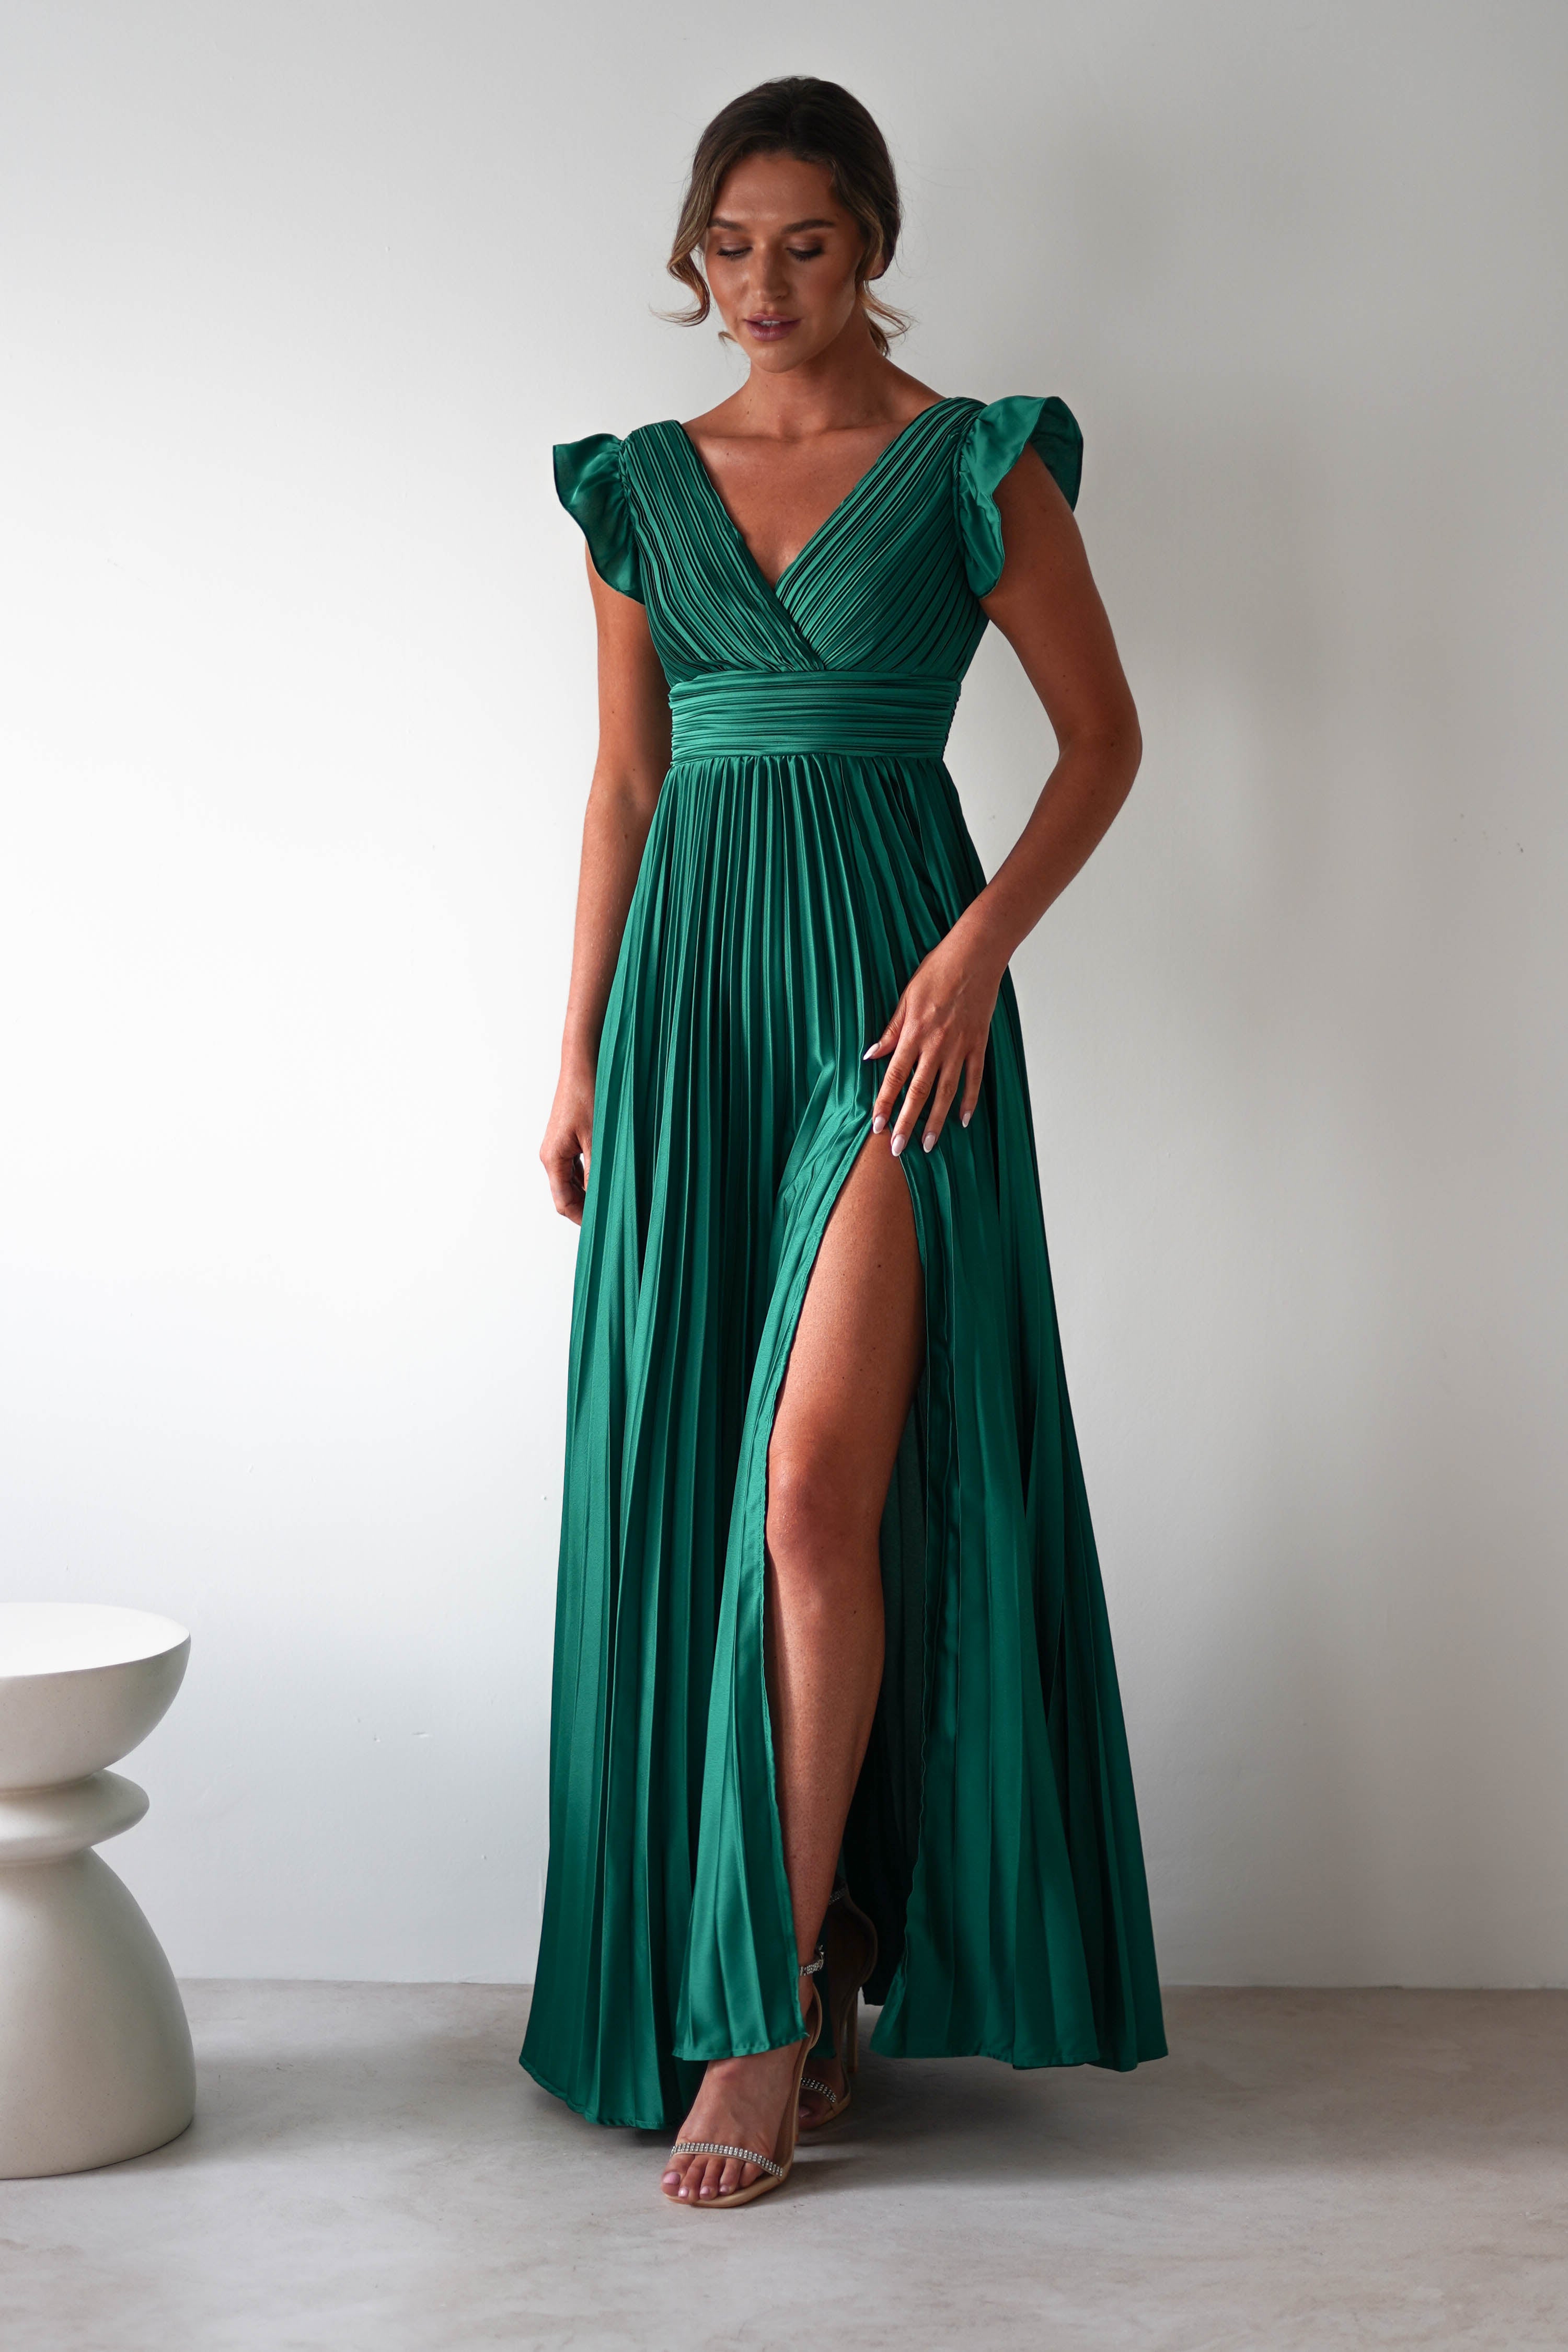 Luxurious formal long maxi dress with tulle sleeve - LoveYourCurvy.com